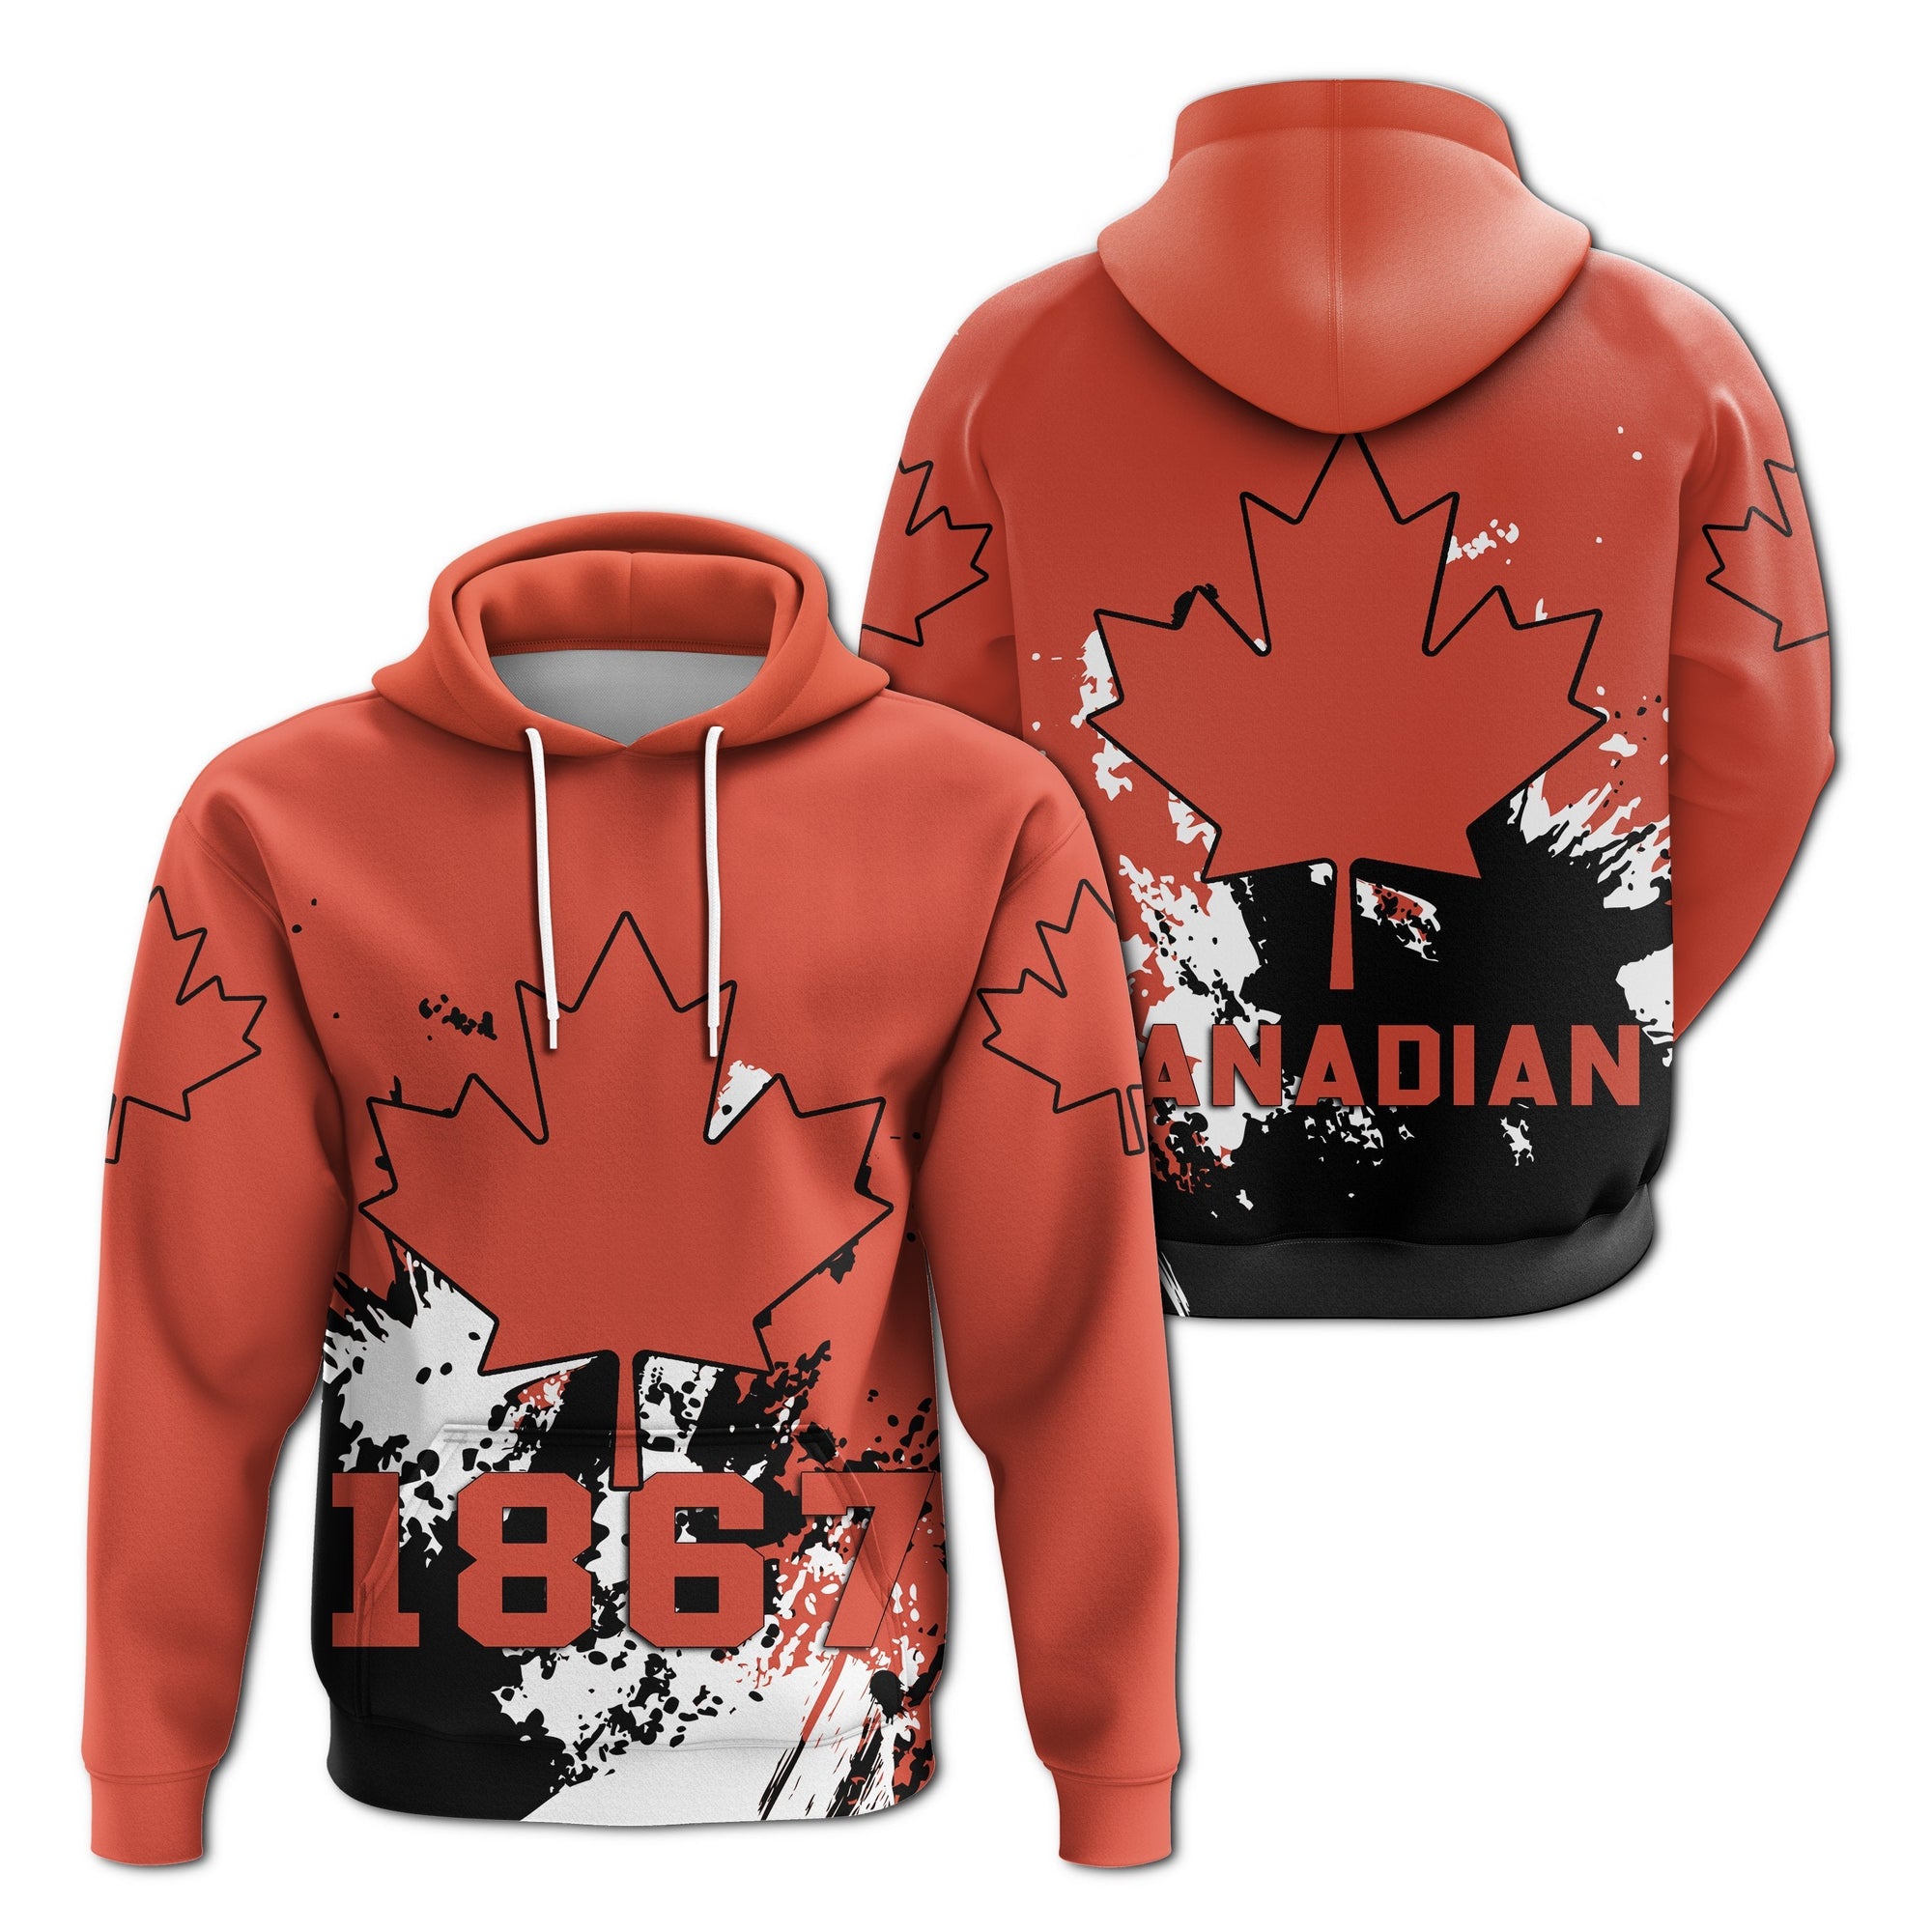 canada-coat-of-arms-zip-up-hoodie-quarter-style